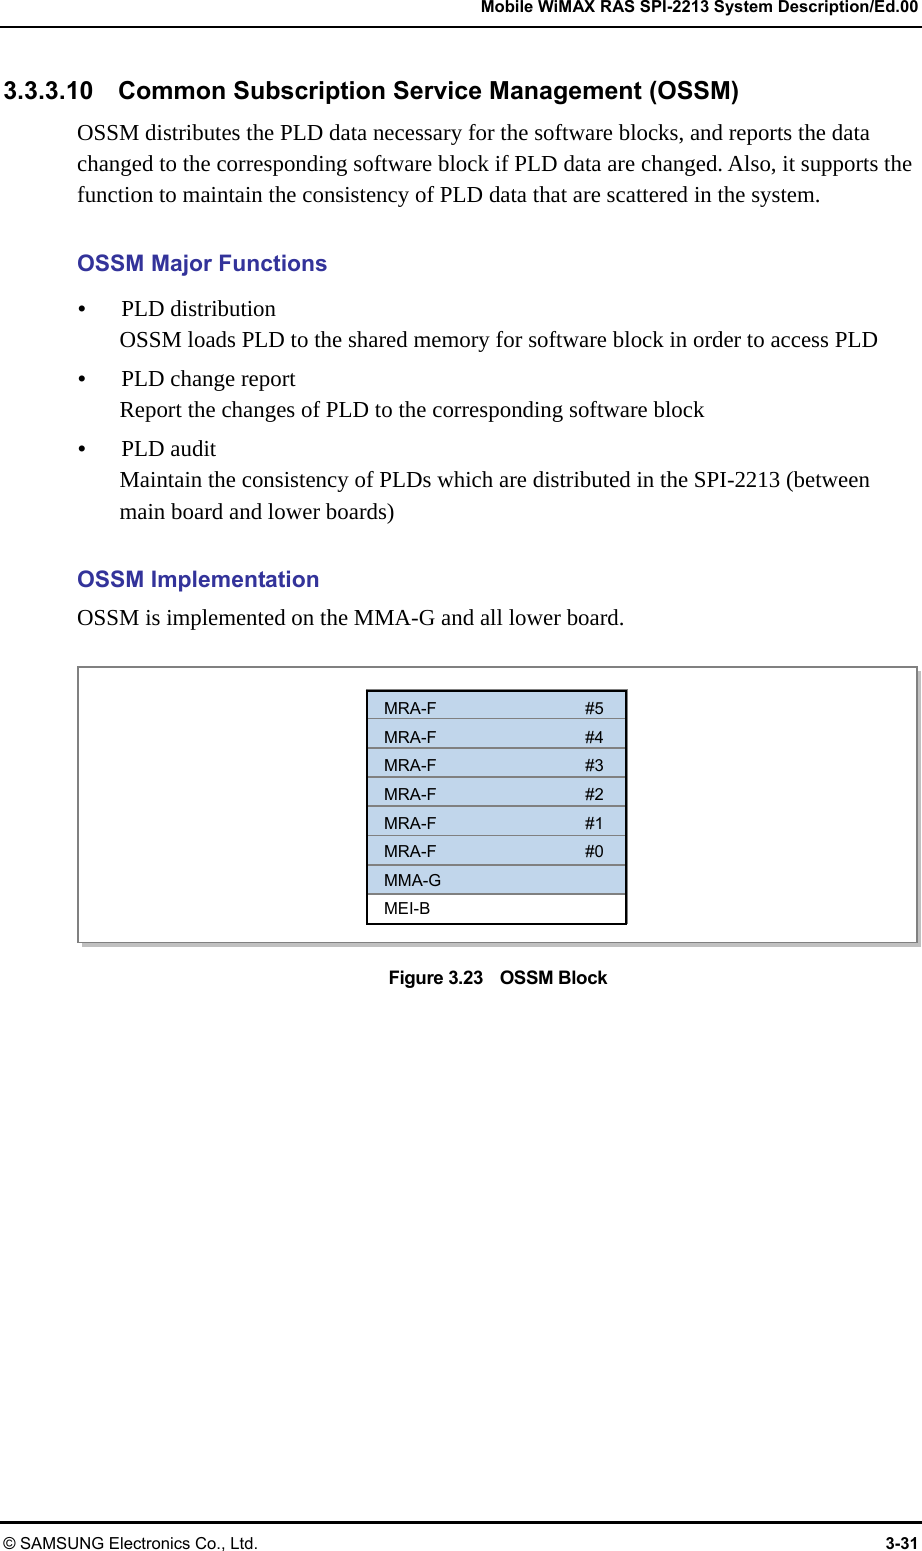   Mobile WiMAX RAS SPI-2213 System Description/Ed.00 © SAMSUNG Electronics Co., Ltd.  3-31 3.3.3.10    Common Subscription Service Management (OSSM) OSSM distributes the PLD data necessary for the software blocks, and reports the data changed to the corresponding software block if PLD data are changed. Also, it supports the function to maintain the consistency of PLD data that are scattered in the system.  OSSM Major Functions y PLD distribution OSSM loads PLD to the shared memory for software block in order to access PLD y PLD change report Report the changes of PLD to the corresponding software block y PLD audit Maintain the consistency of PLDs which are distributed in the SPI-2213 (between main board and lower boards)  OSSM Implementation OSSM is implemented on the MMA-G and all lower board.  Figure 3.23    OSSM Block  MRA-F #5 MRA-F #4 MRA-F #3 MRA-F #2 MRA-F #1 MRA-F #0 MMA-G MEI-B 